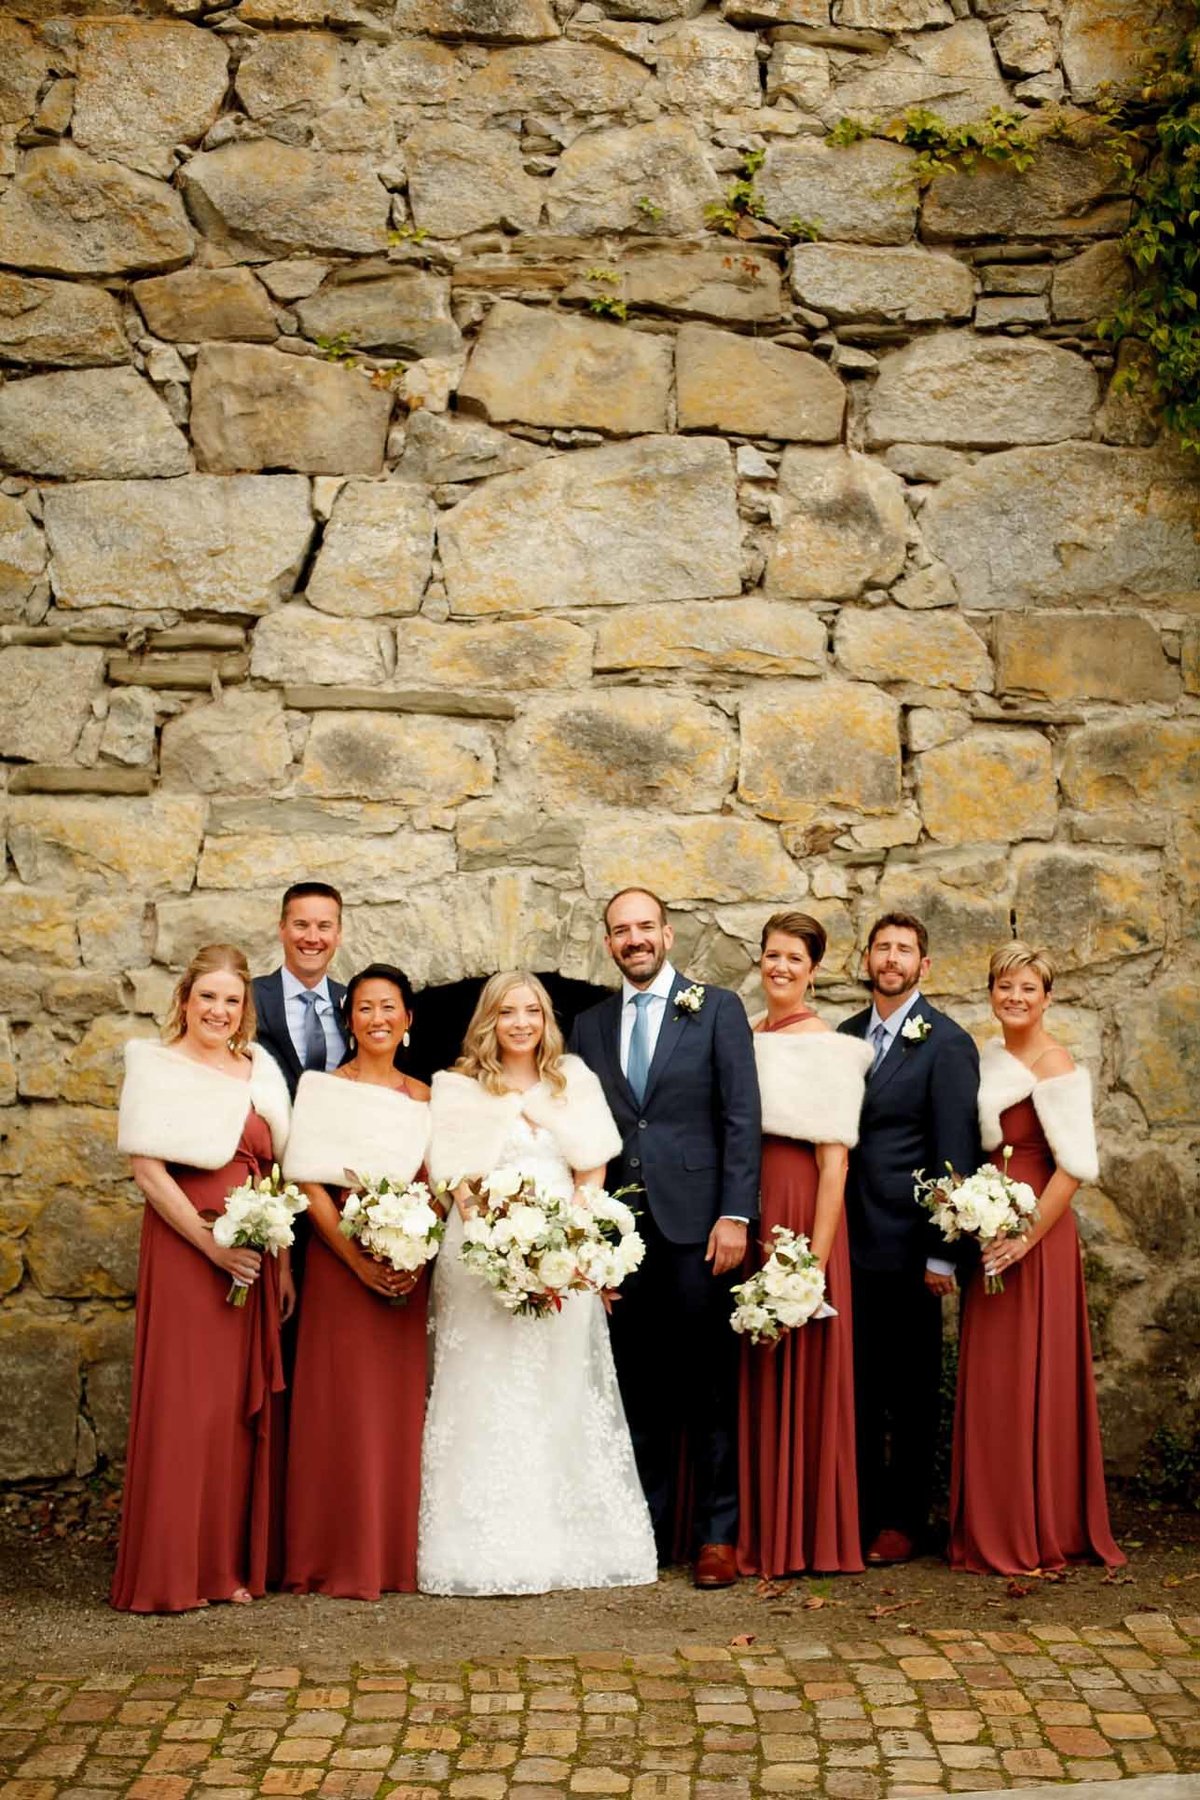 wedding party with brides maids wearing rust colored dresses with white cape, holding white flower bouquets